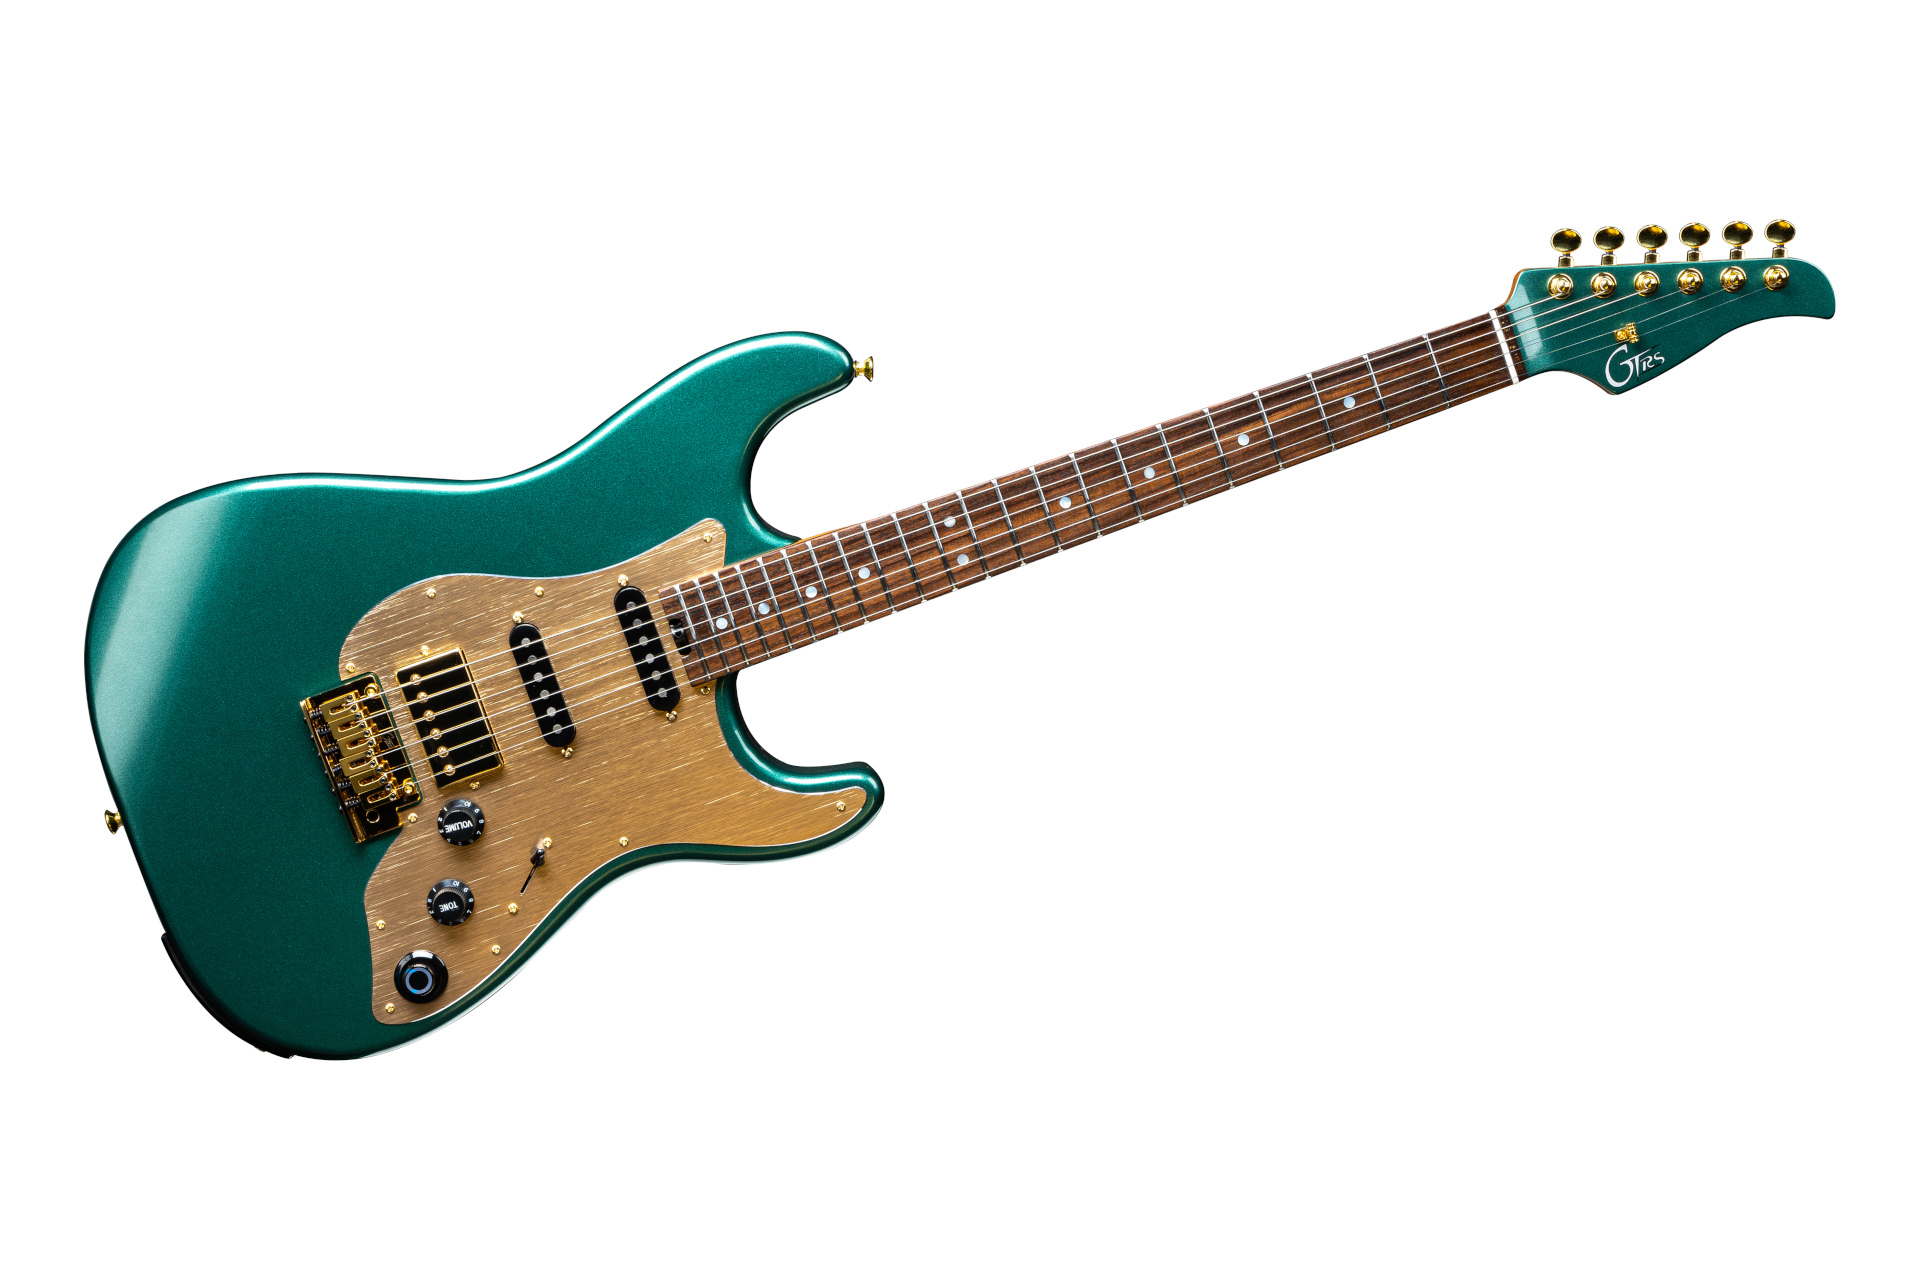 Mooer GTRS Guitars Standard 900 Intelligent Guitar (S900) with Wireless System - Racing Green